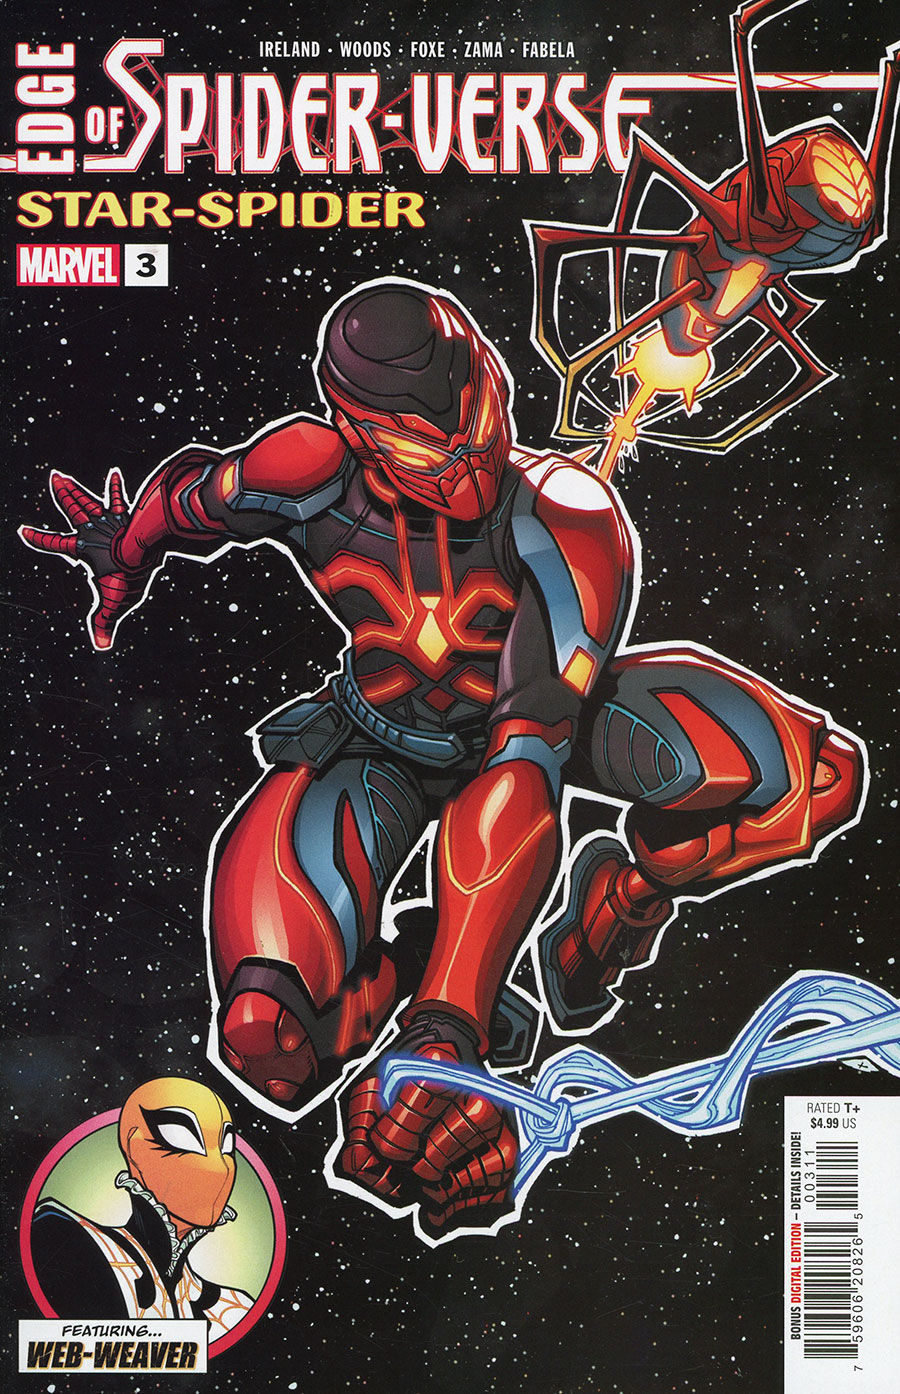 Edge Of Spider-Verse Vol 4 #3 Cover A Regular Chad Hardin Cover